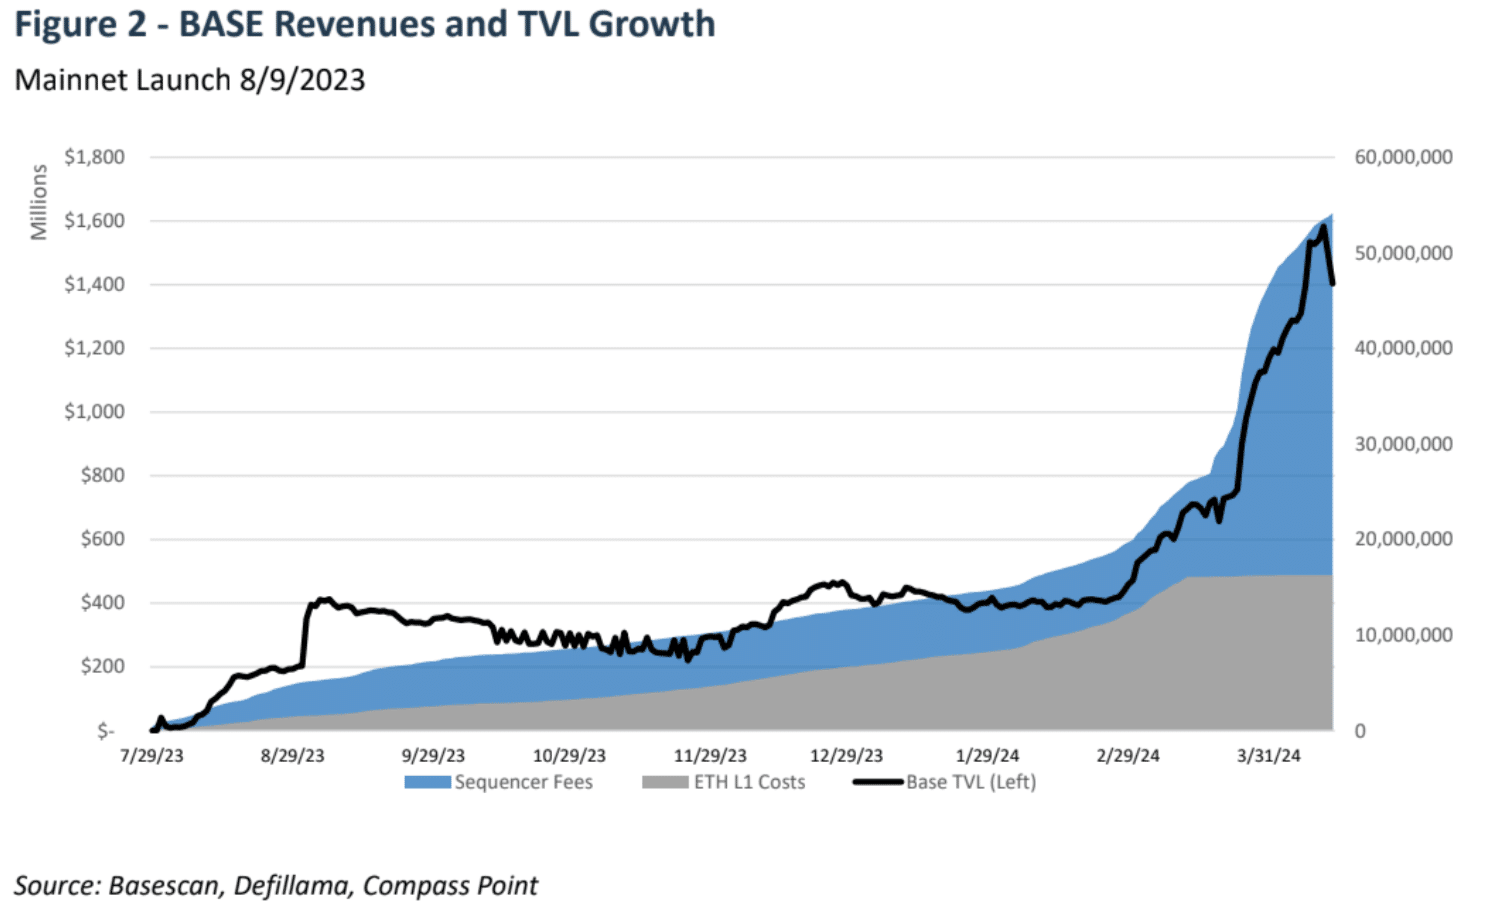 BASE Revenues and TVL Growth